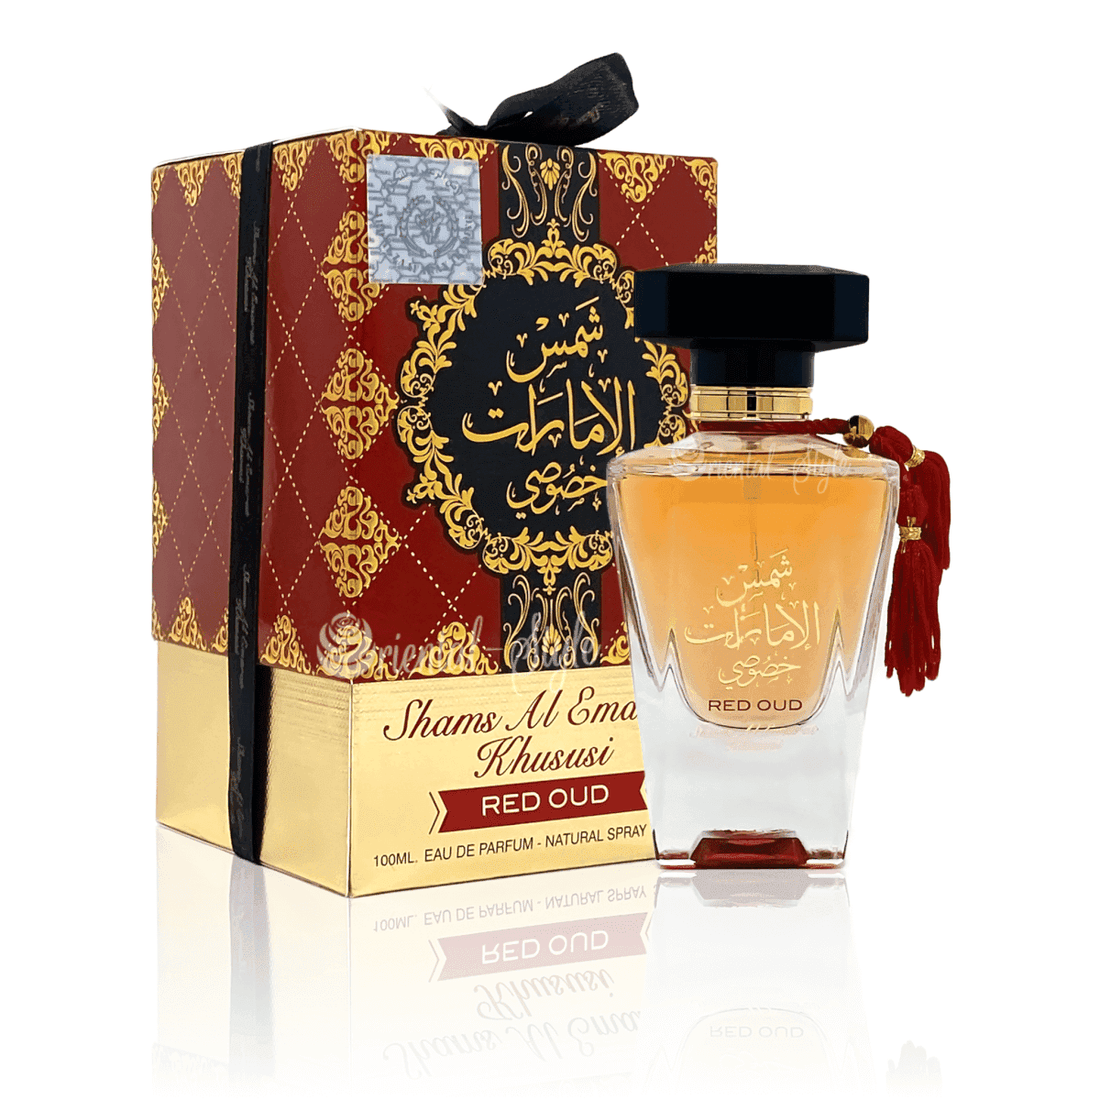 Image showing the elegant bottle of Shams Al Emarat Khususi Red Oud Eau De Parfum by Ard Al Zaafaran, reflecting an epitome of luxury and exquisiteness.